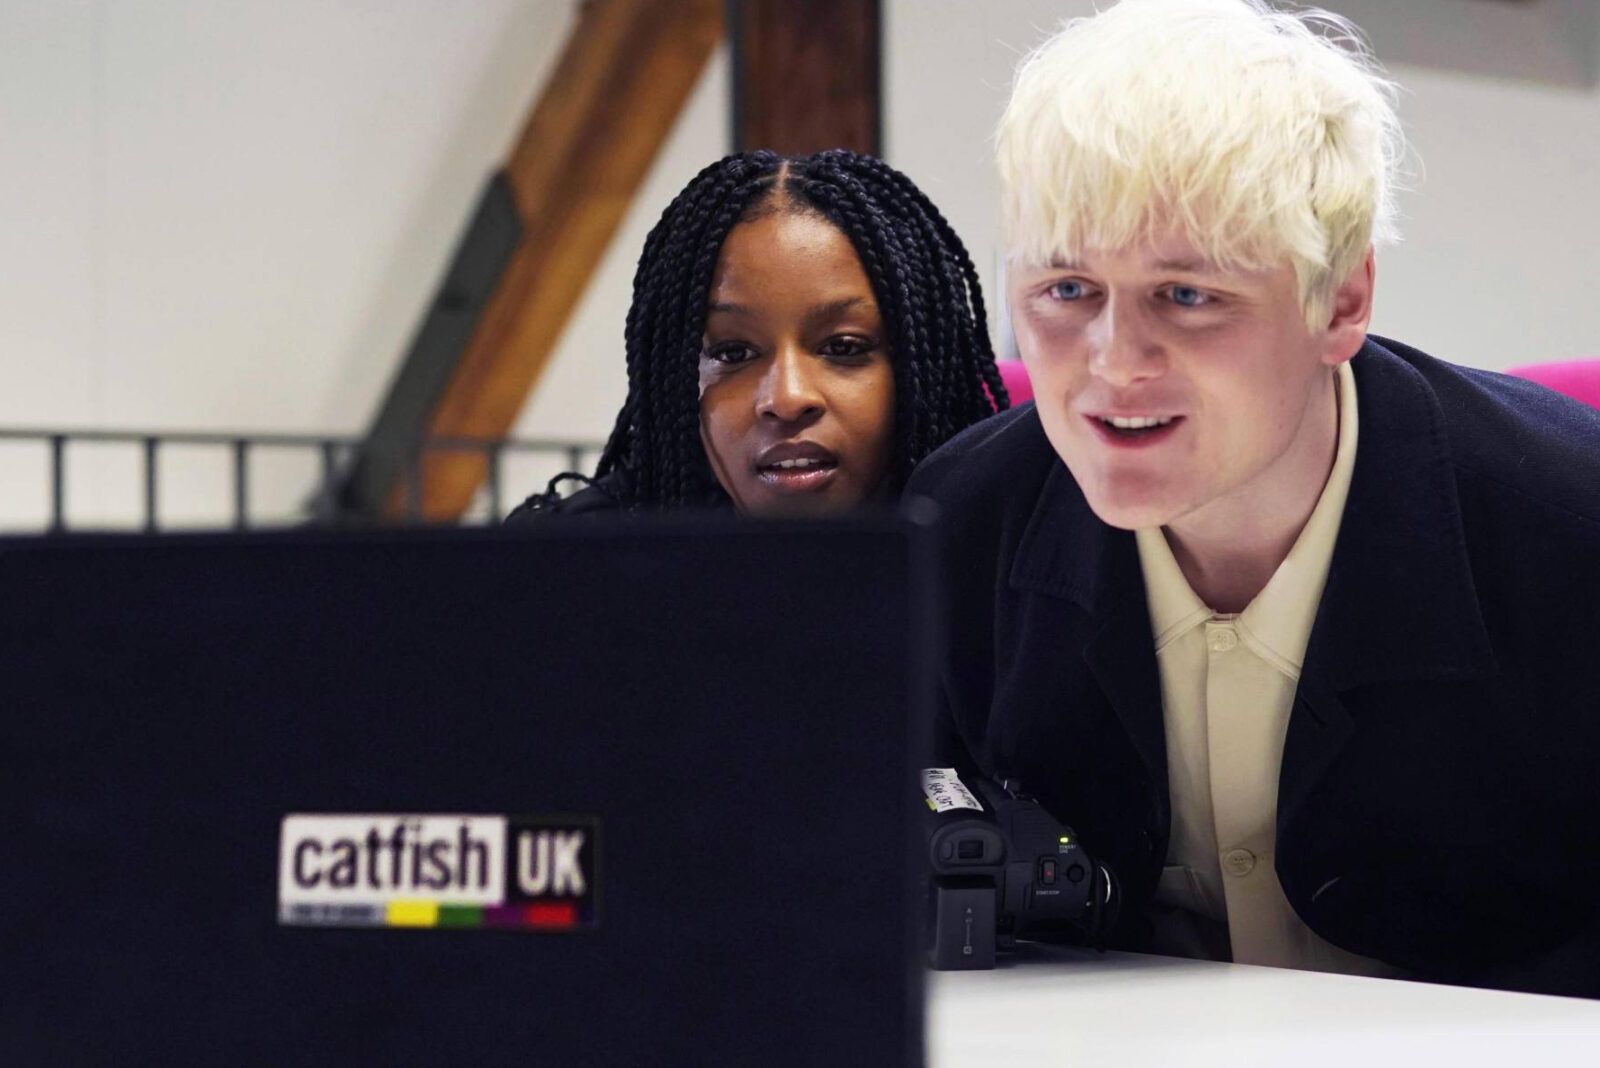 The first series of Catfish UK is finally hitting our TV screens this week, The Manc